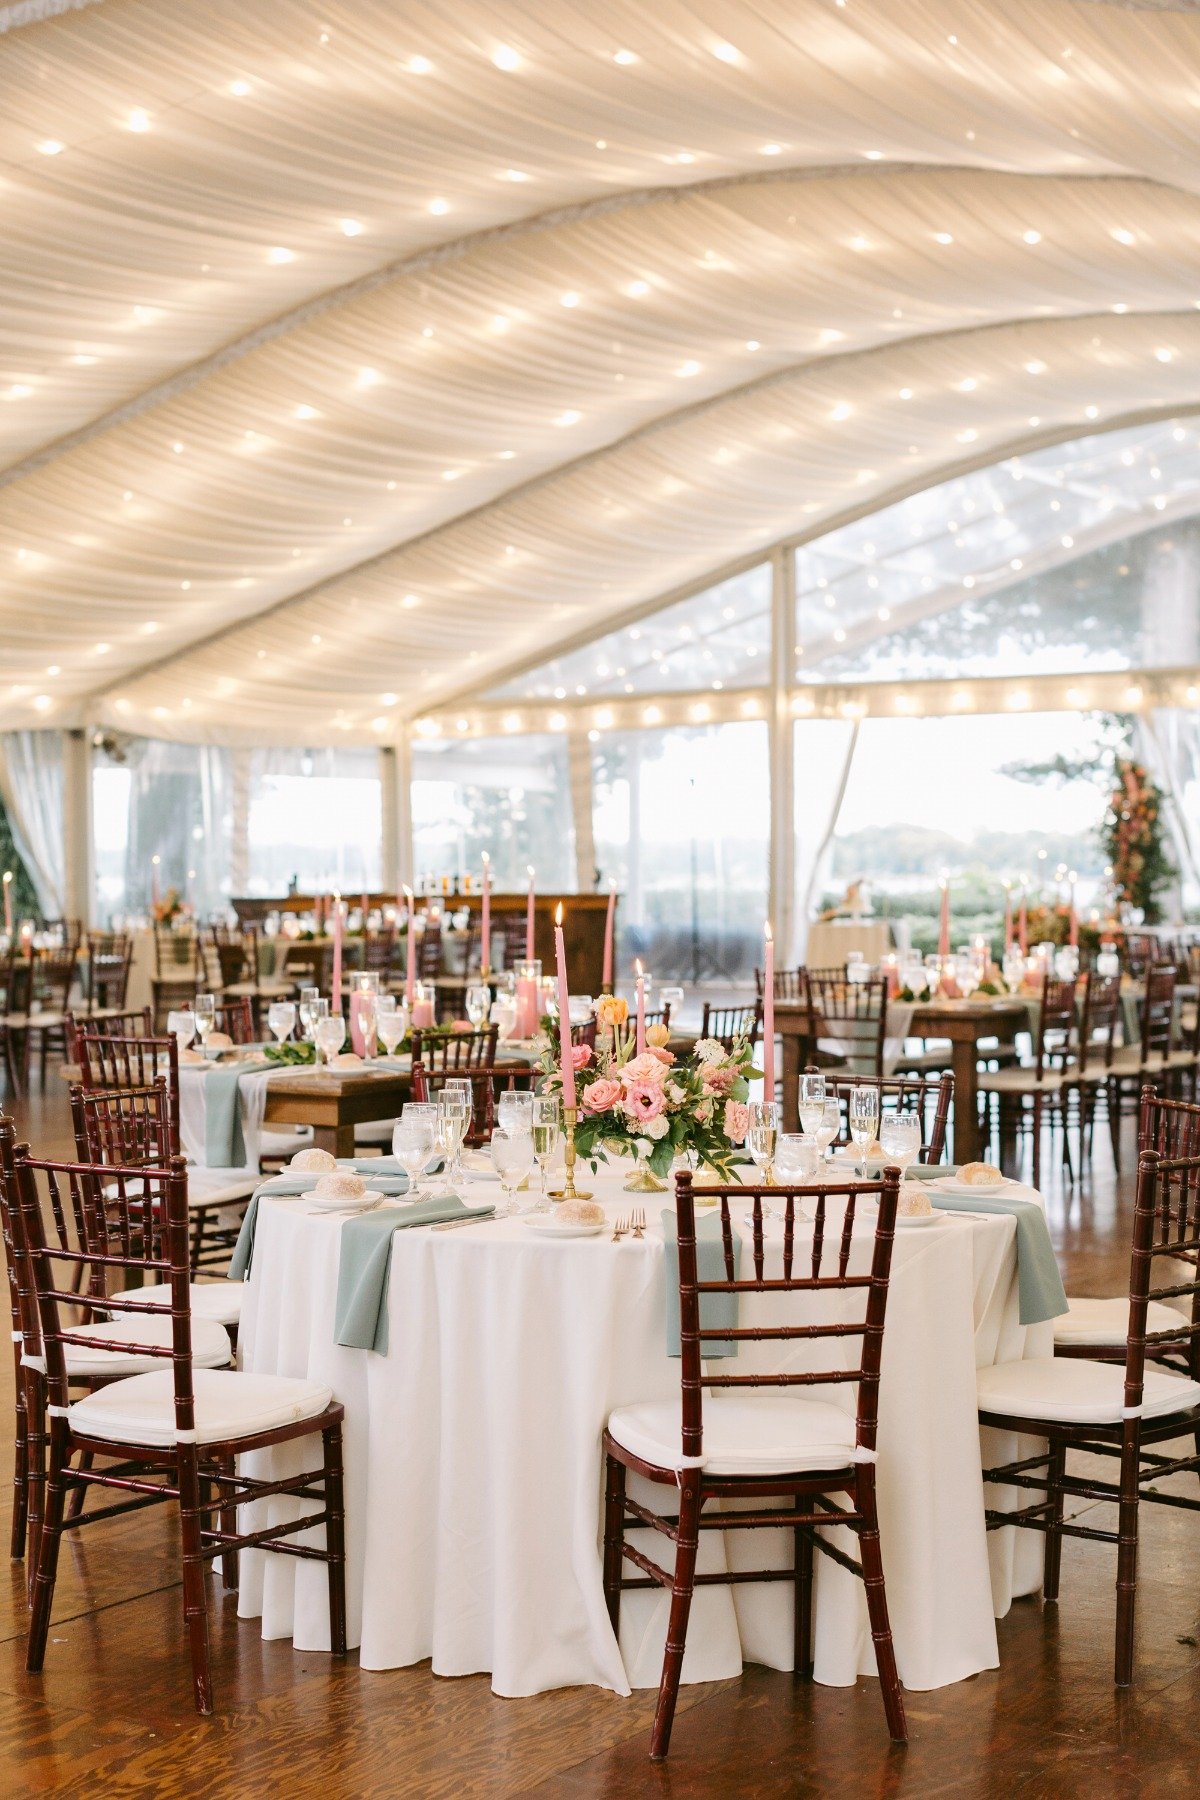 Reception tent with tables, string lights, and centerpieces